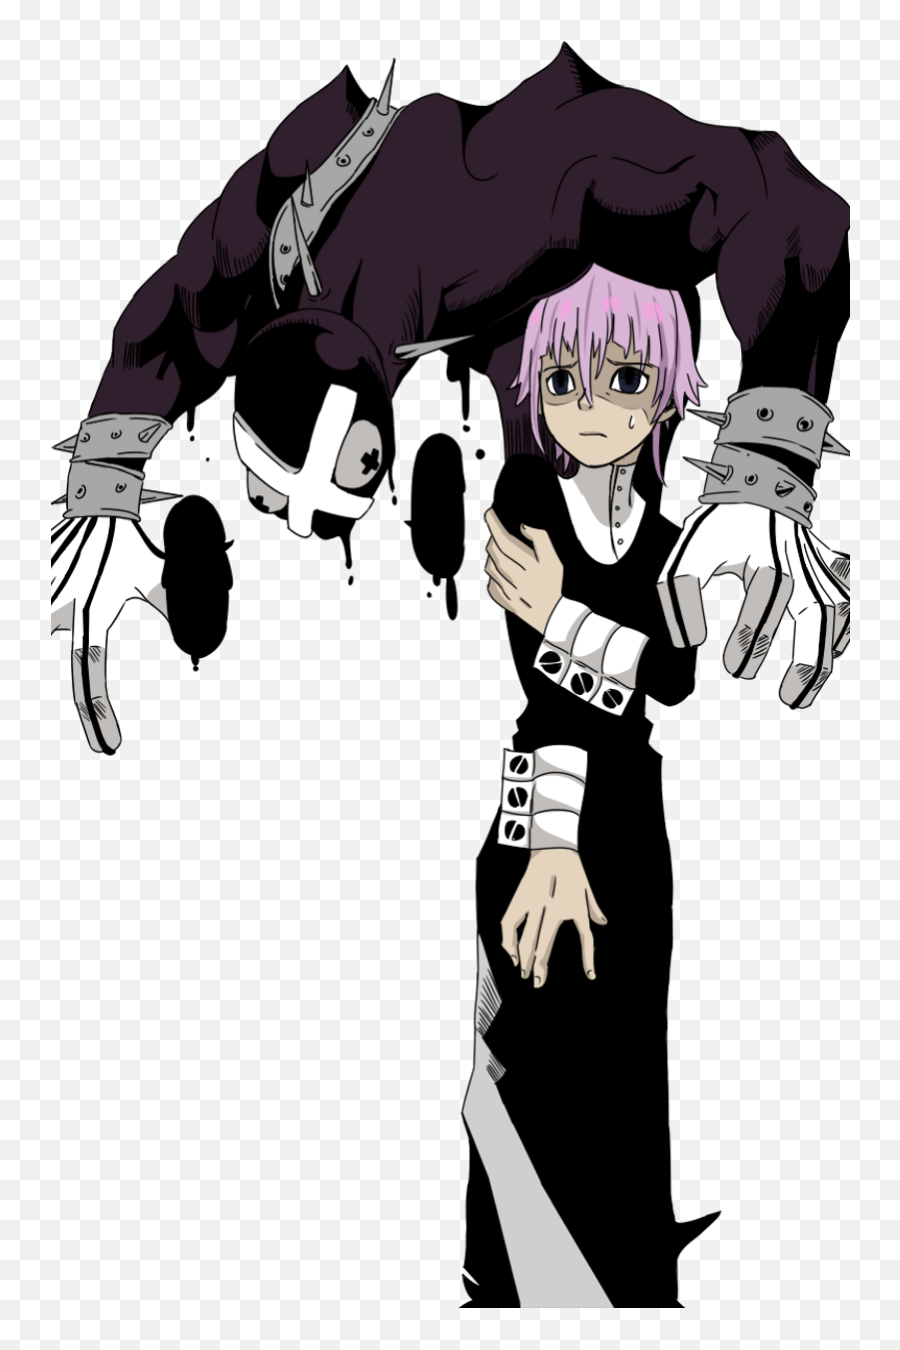 Image In Soul Eater Collection By Miss Michaelis - Soul Eater Manga Art Png,Soul Eater Transparent